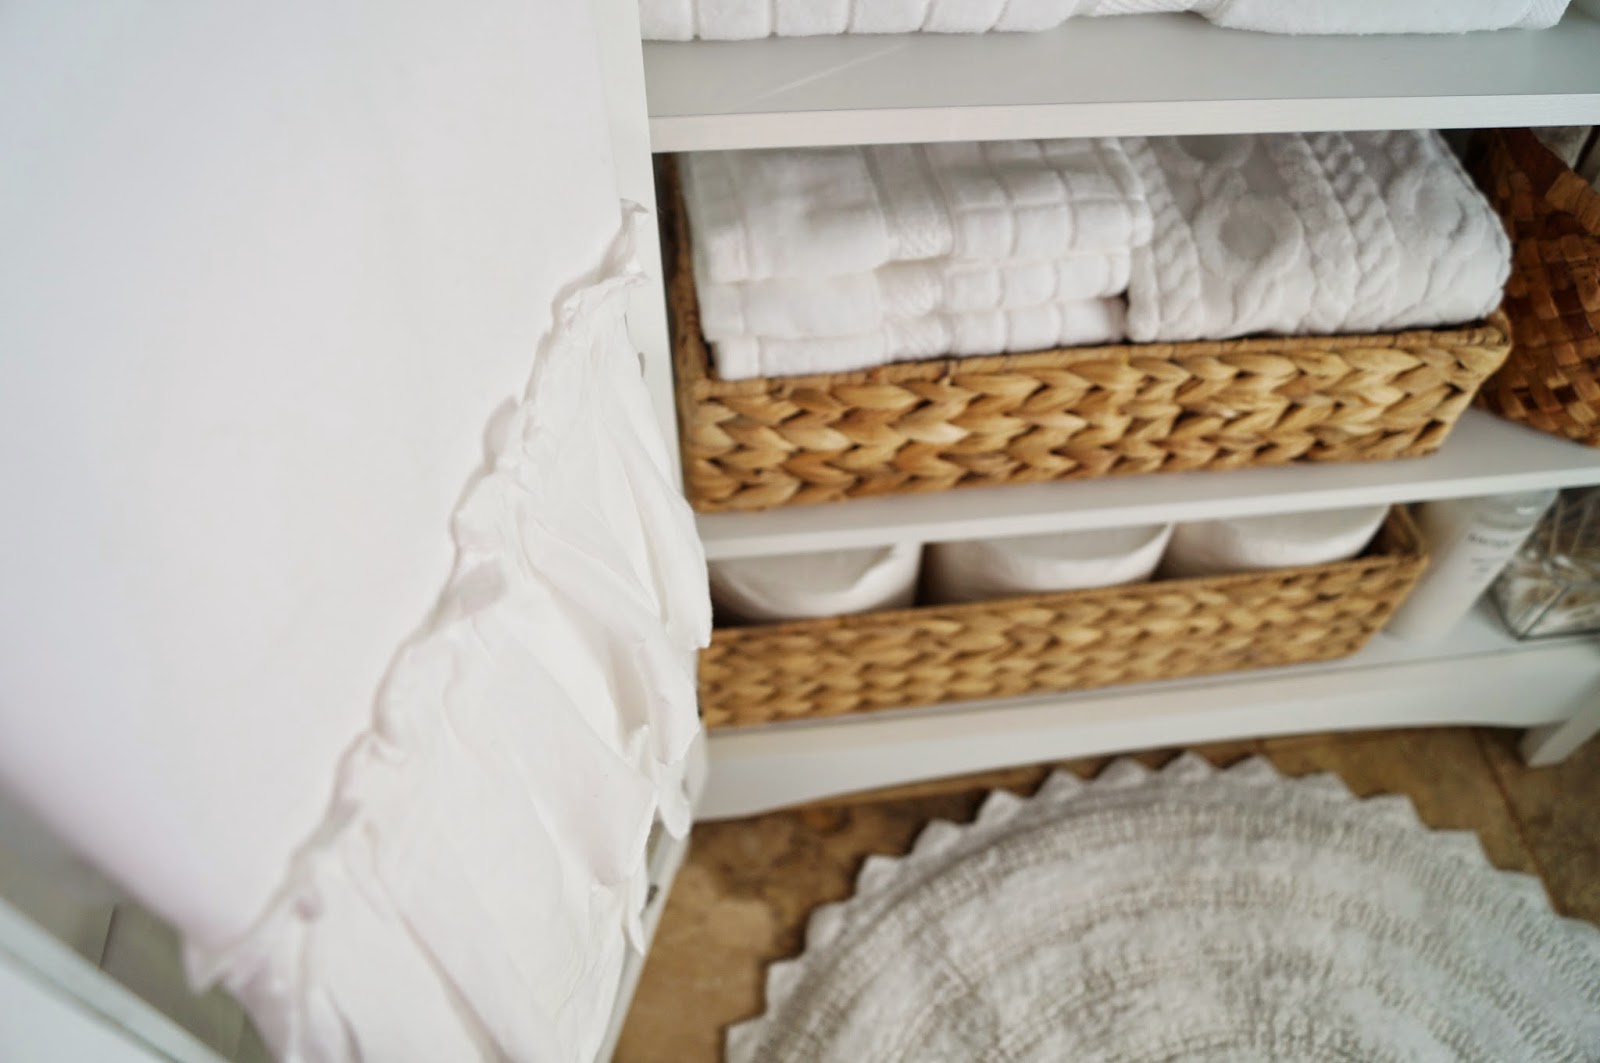 Don't Disturb This Groove: Small-Bathroom Linen Cabinet